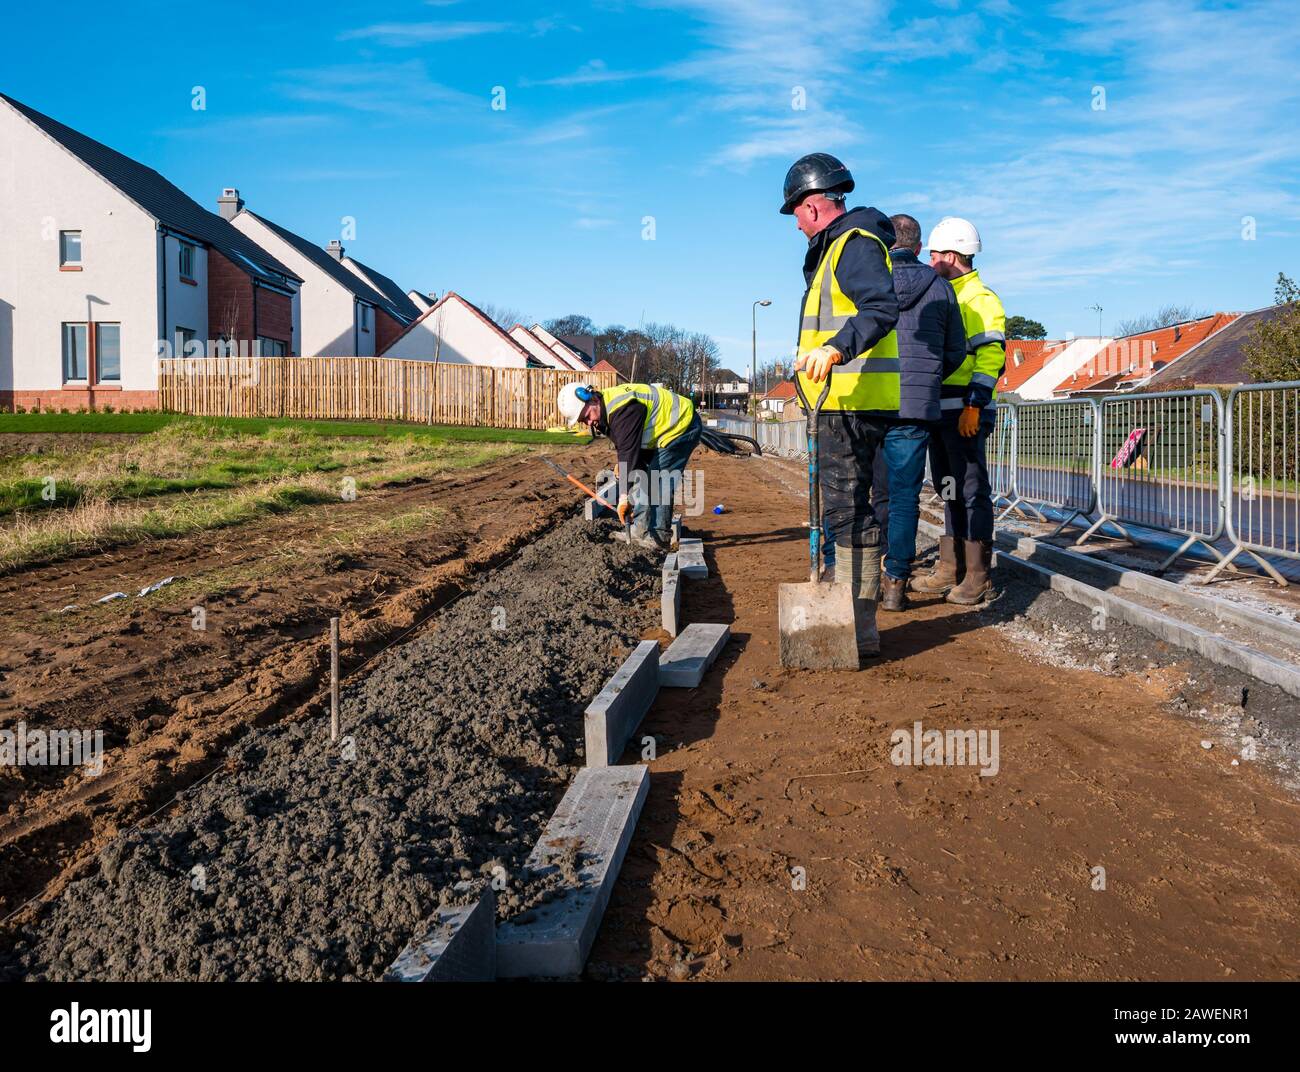 Cala Homes funded construction of core path for walking & cycling between Gullane & West Fenton, East Lothian, Scotland, UK Stock Photo